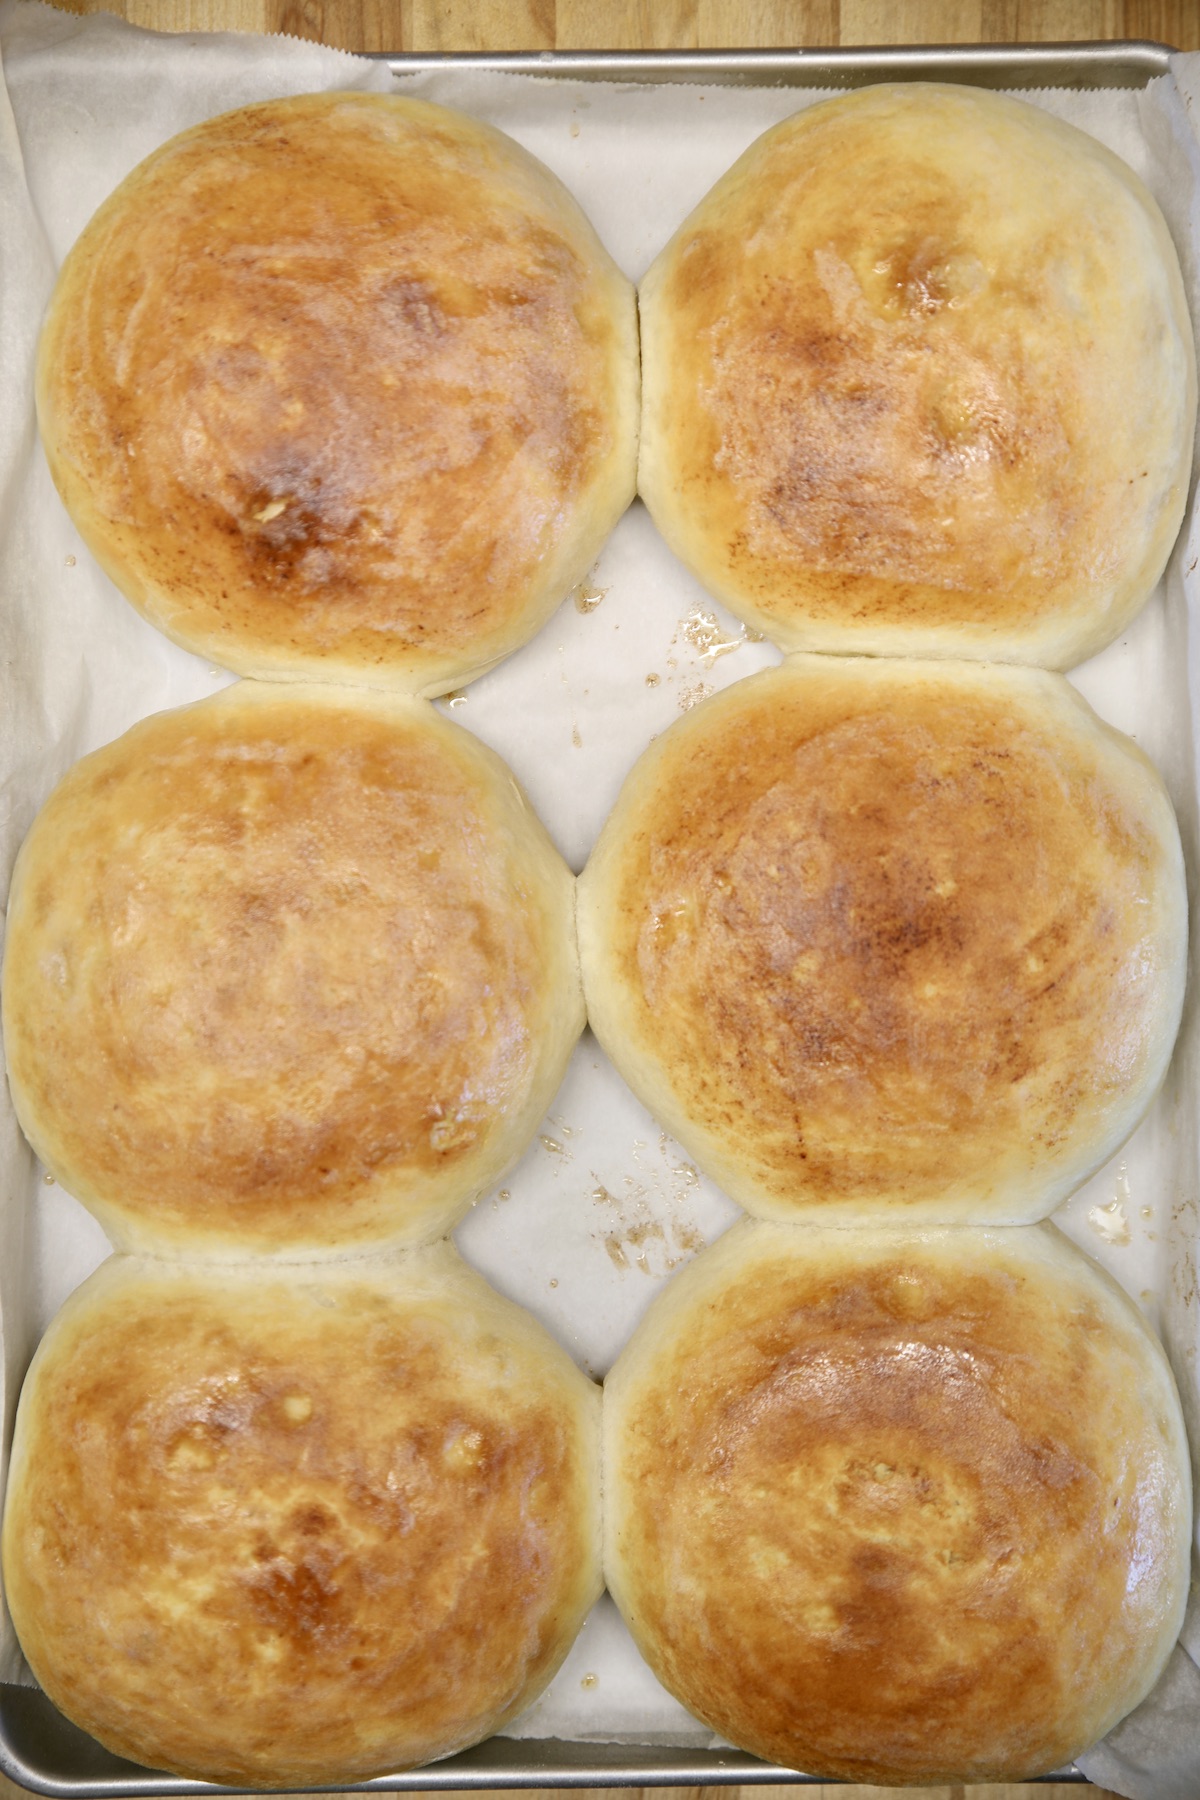 6 baked bread bowls on a baking sheet.